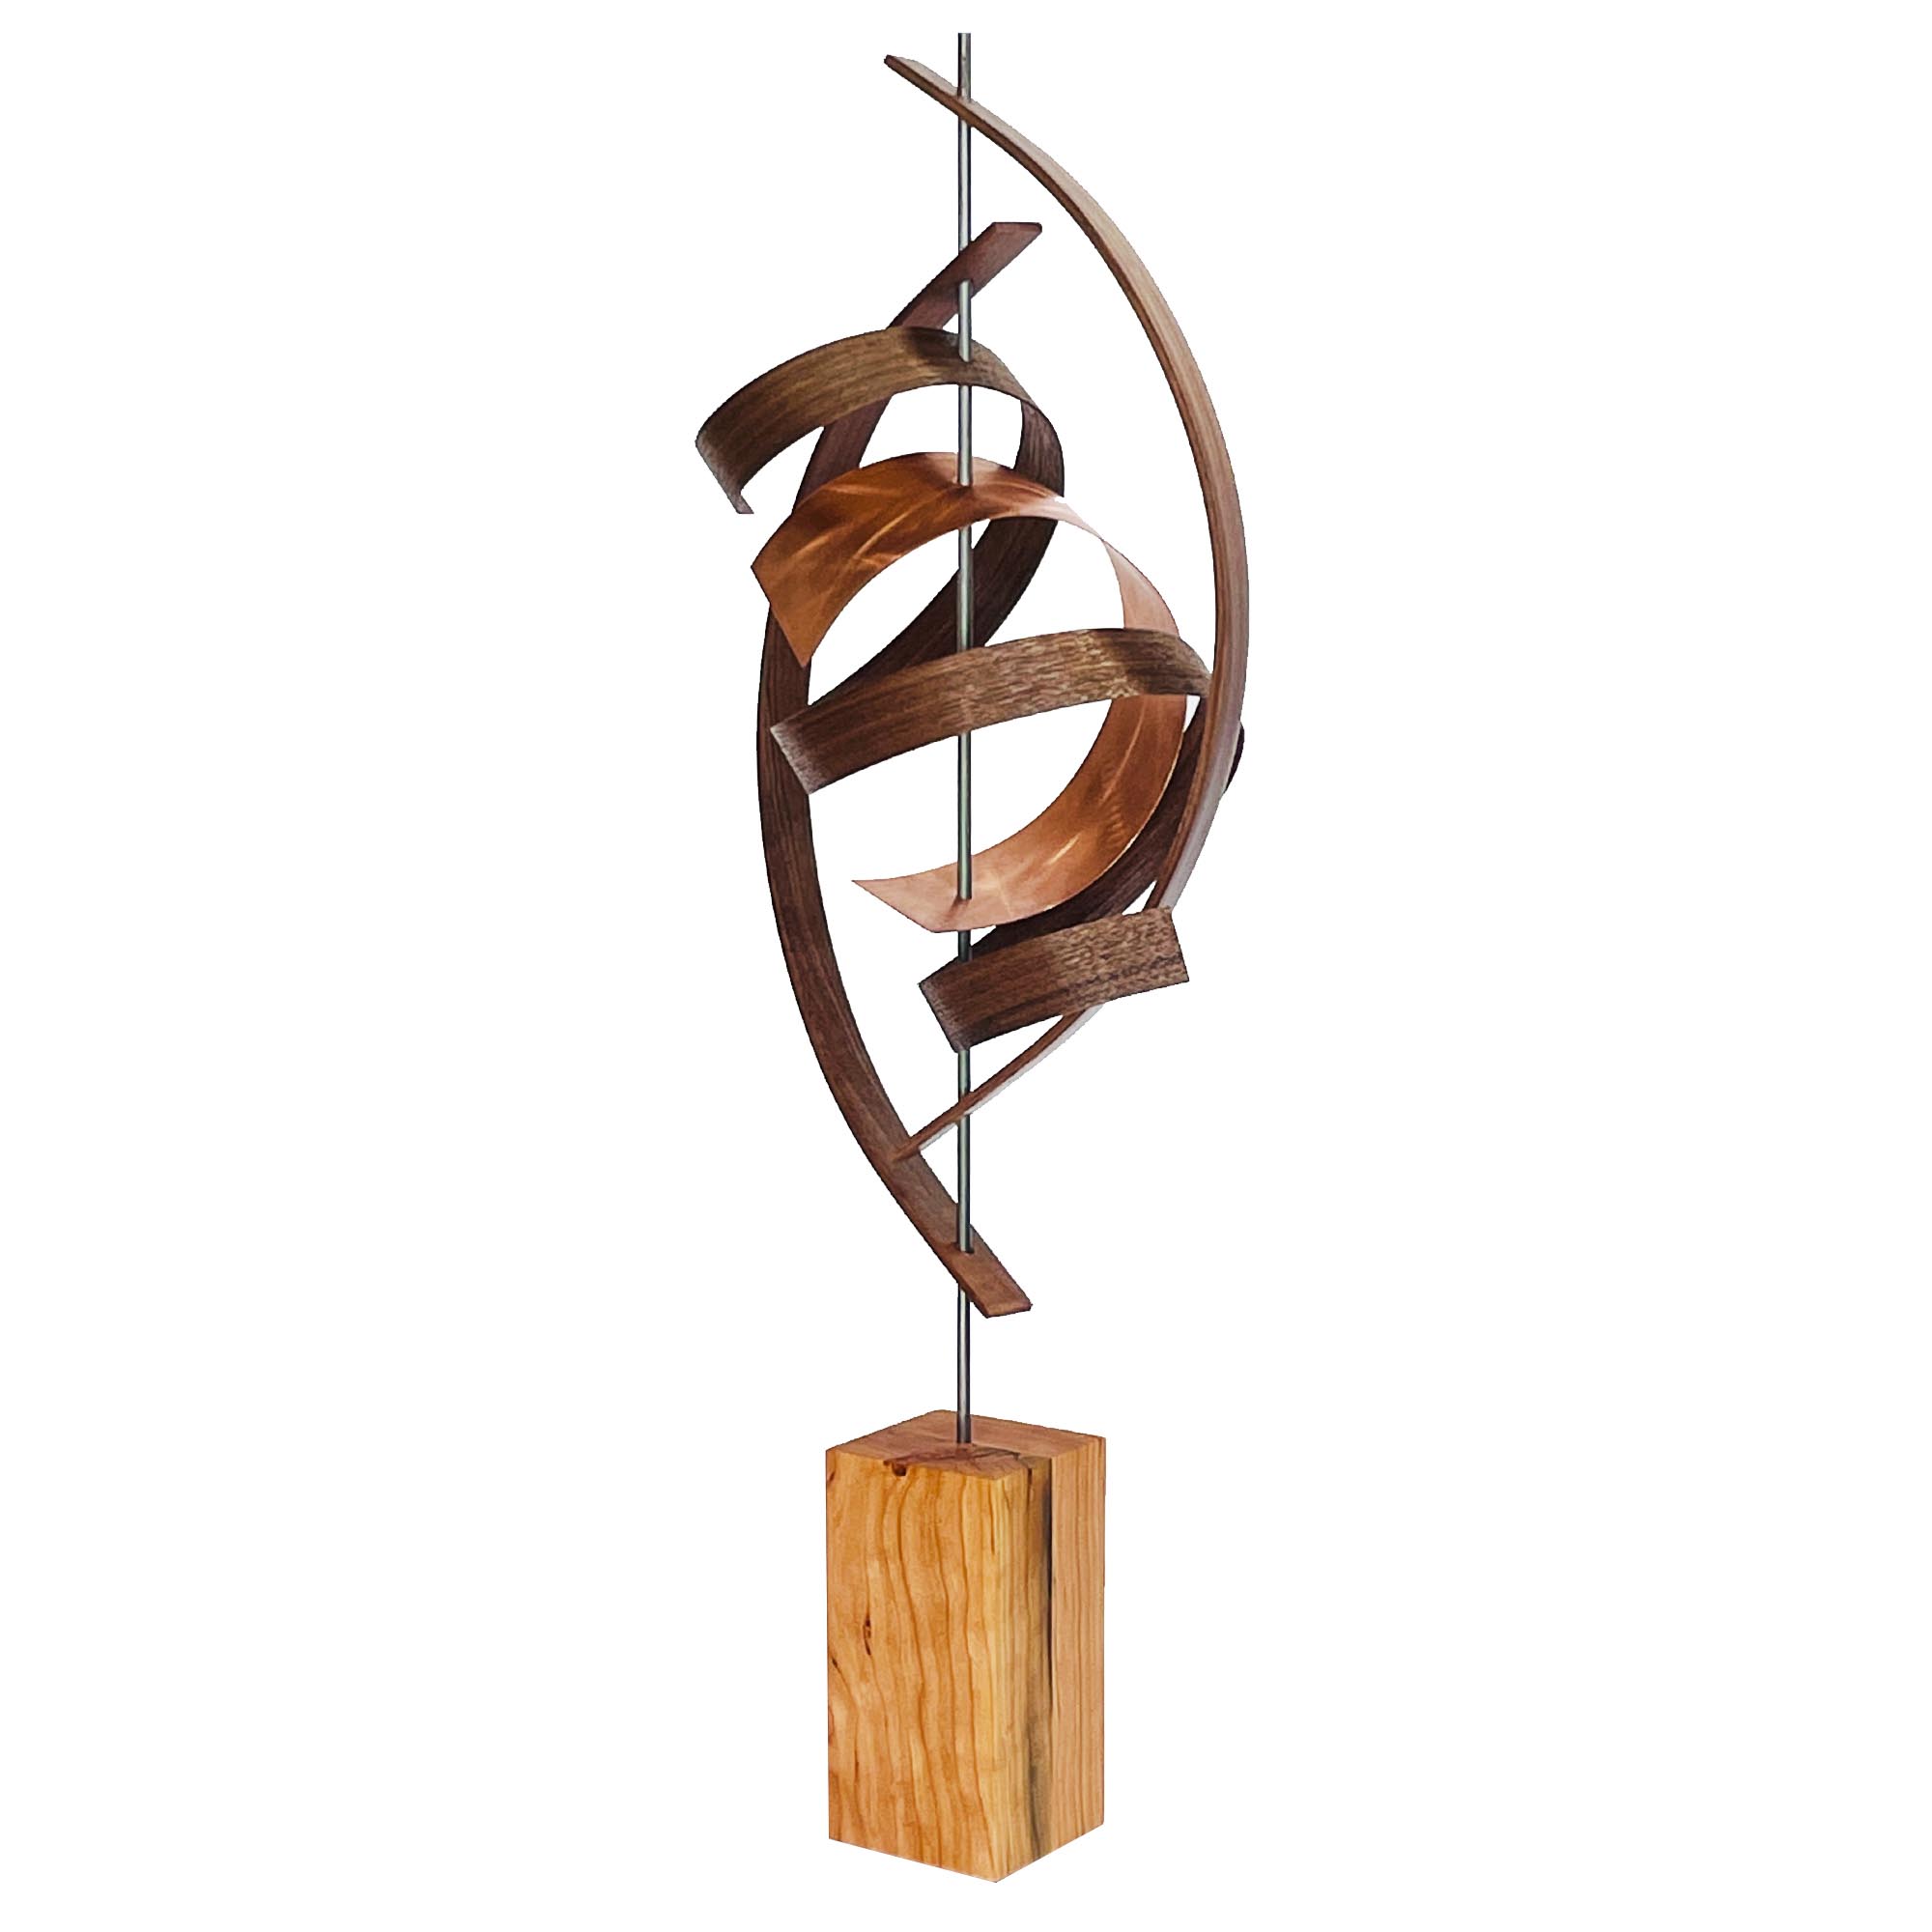 Sprung by Jackson Wright - Abstract Wood Sculpture, Kinetic Sculpture - Image 2